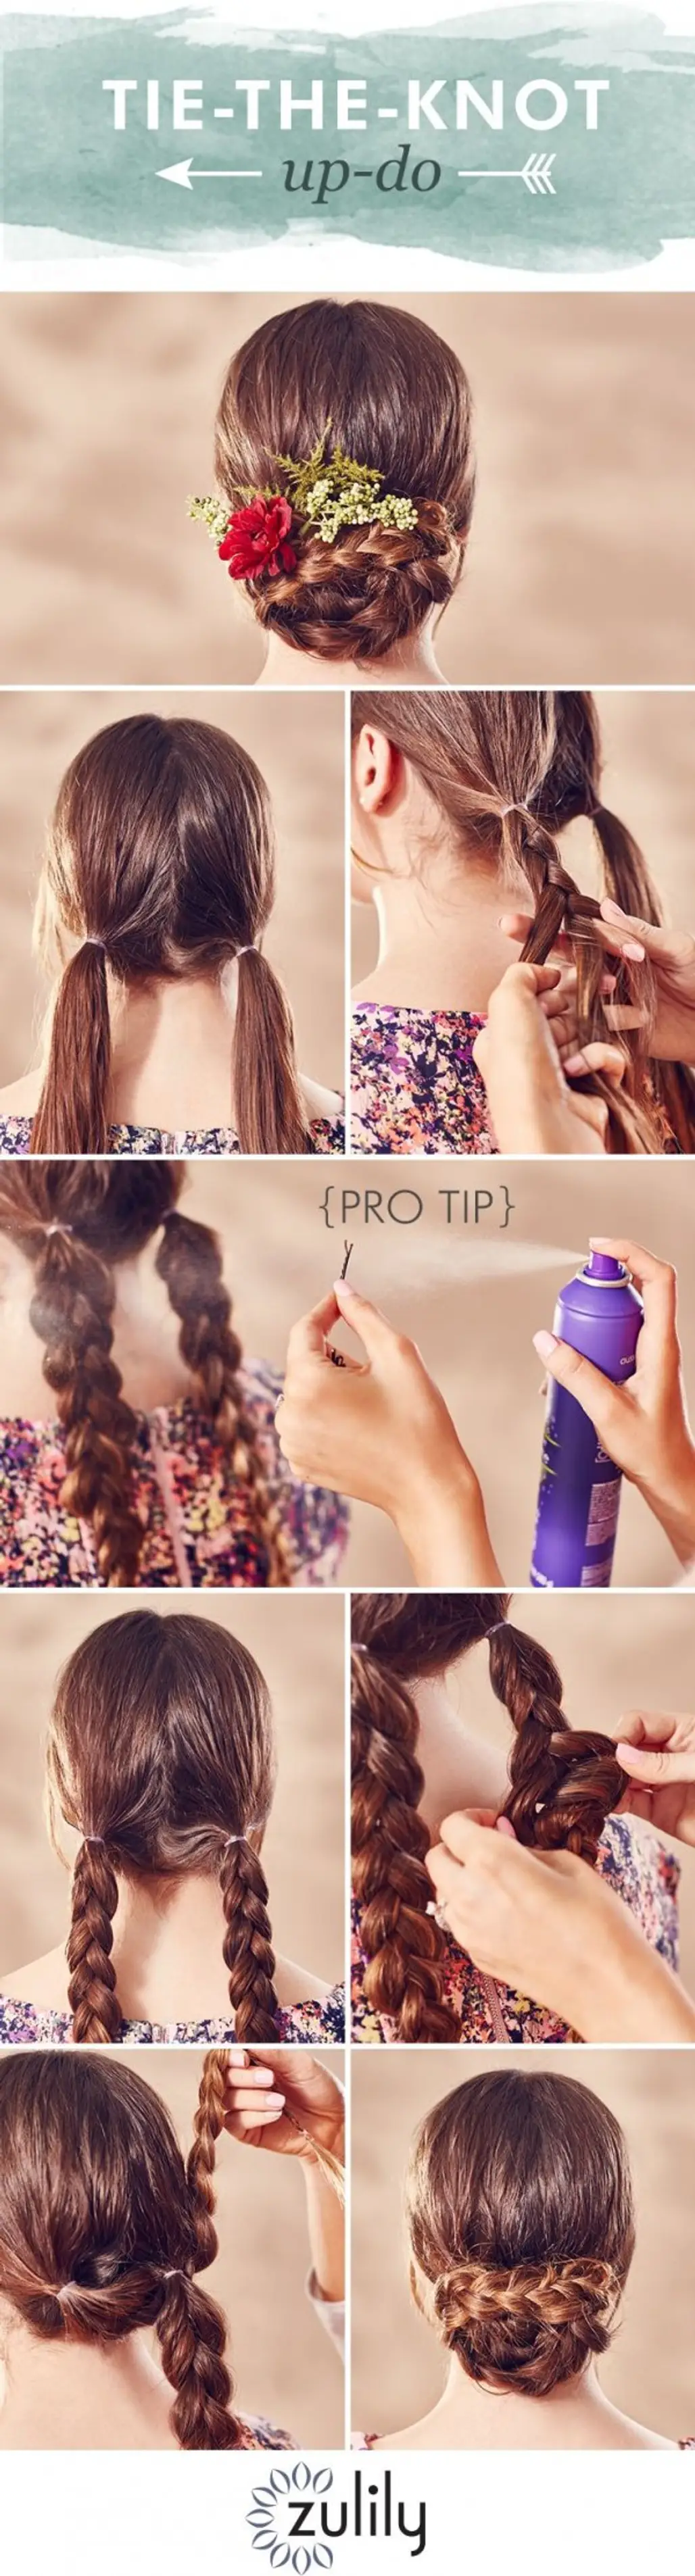 Zulily,hair,brown,hairstyle,beauty,